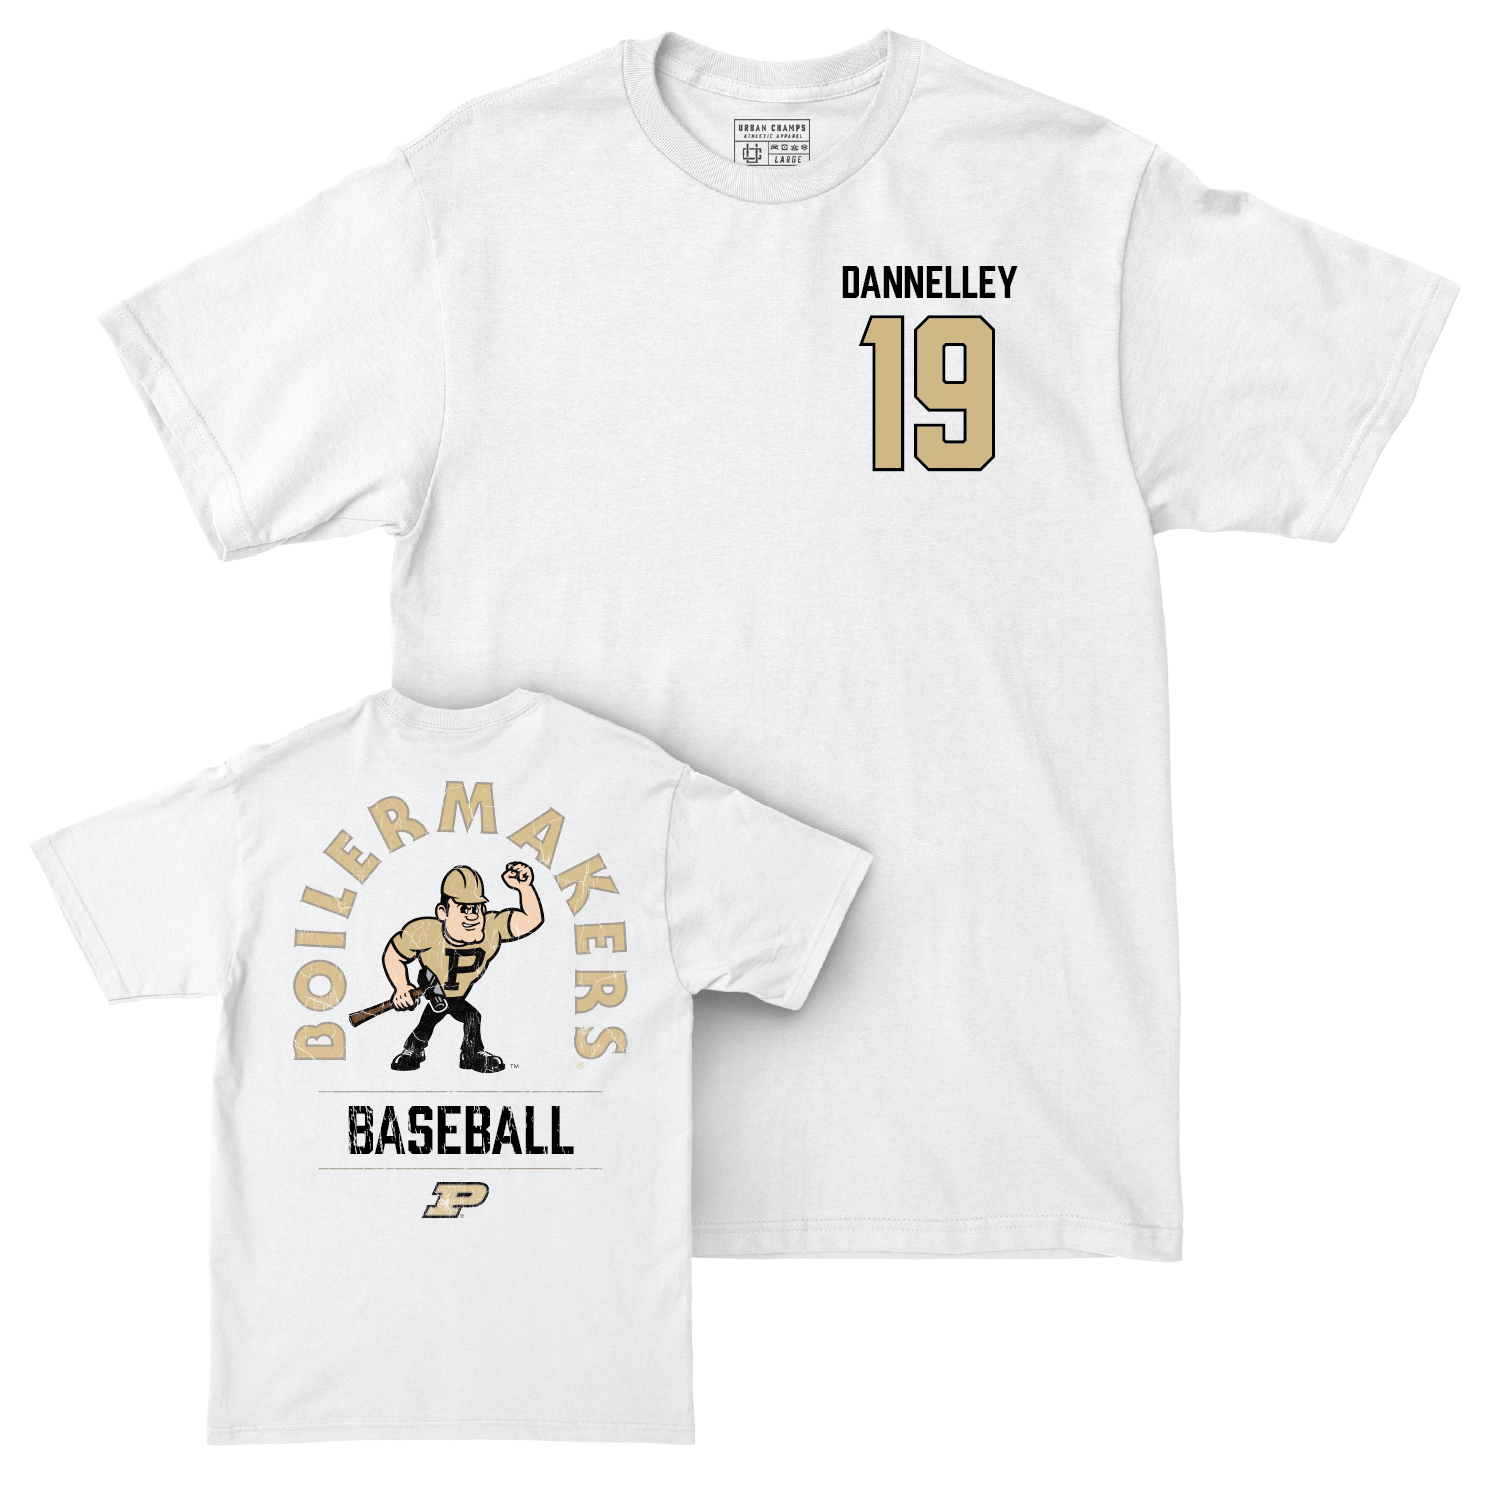 Baseball White Mascot Comfort Colors Tee - Jackson Dannelley | #19 Youth Small